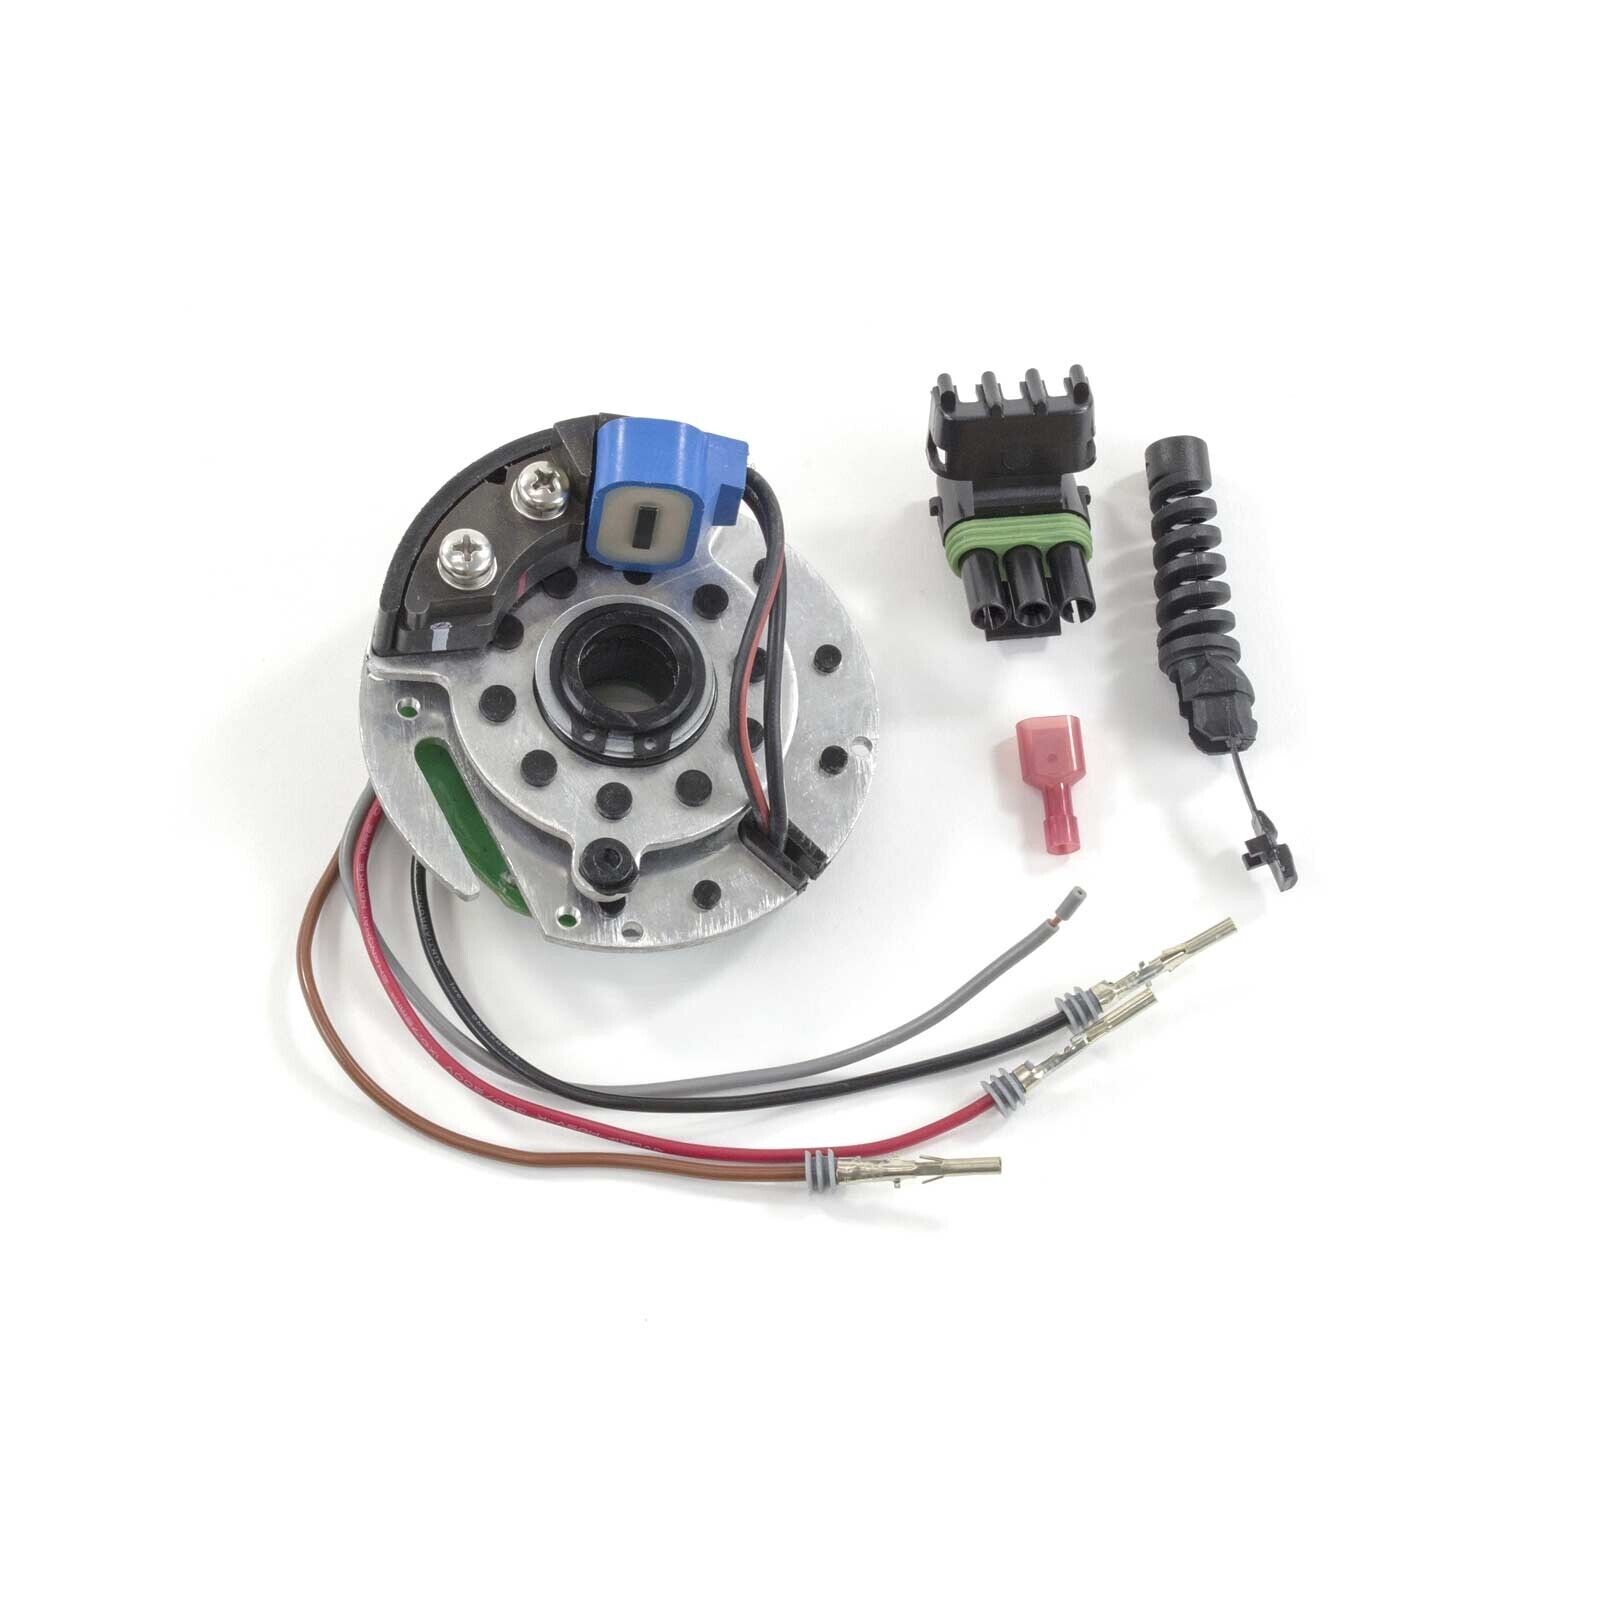 Distributor Module with pickup for the Clockwise- ready to run-RTR distributor